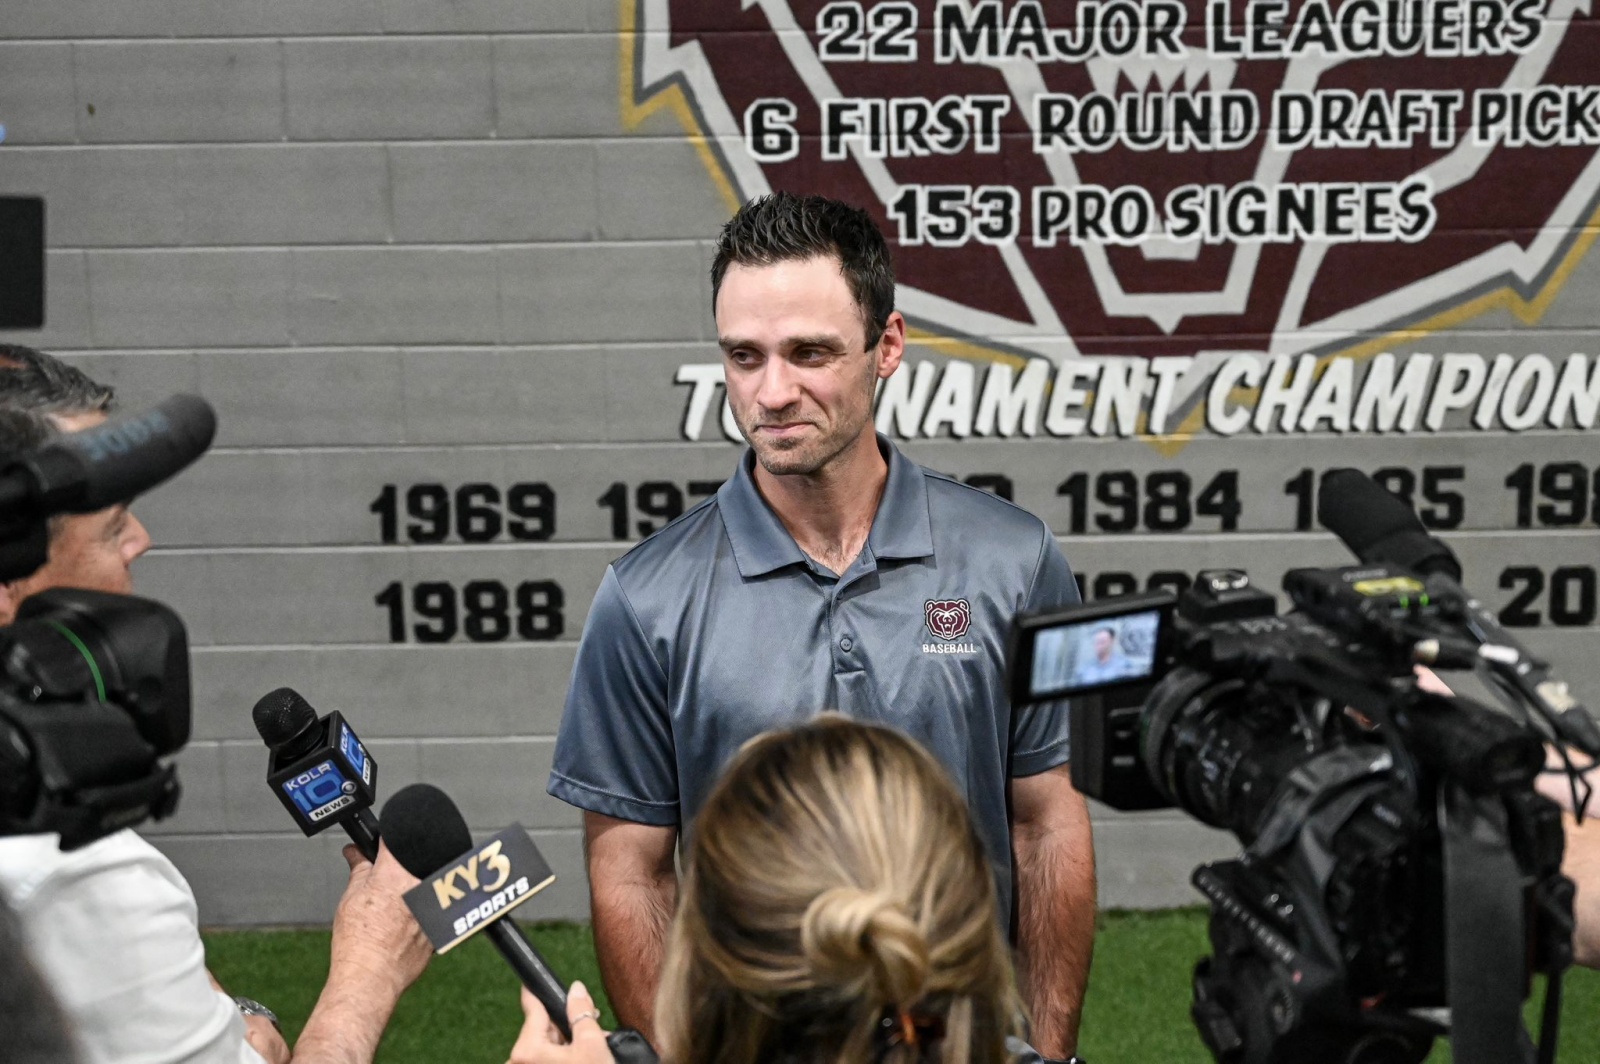 Joey Hawkins said he’s ready to hit the ground running as Missouri State’s new baseball coach, succeeding the legendary Keith Guttin who spent 42 seasons guiding the Bears. (Photo by Missouri State University)